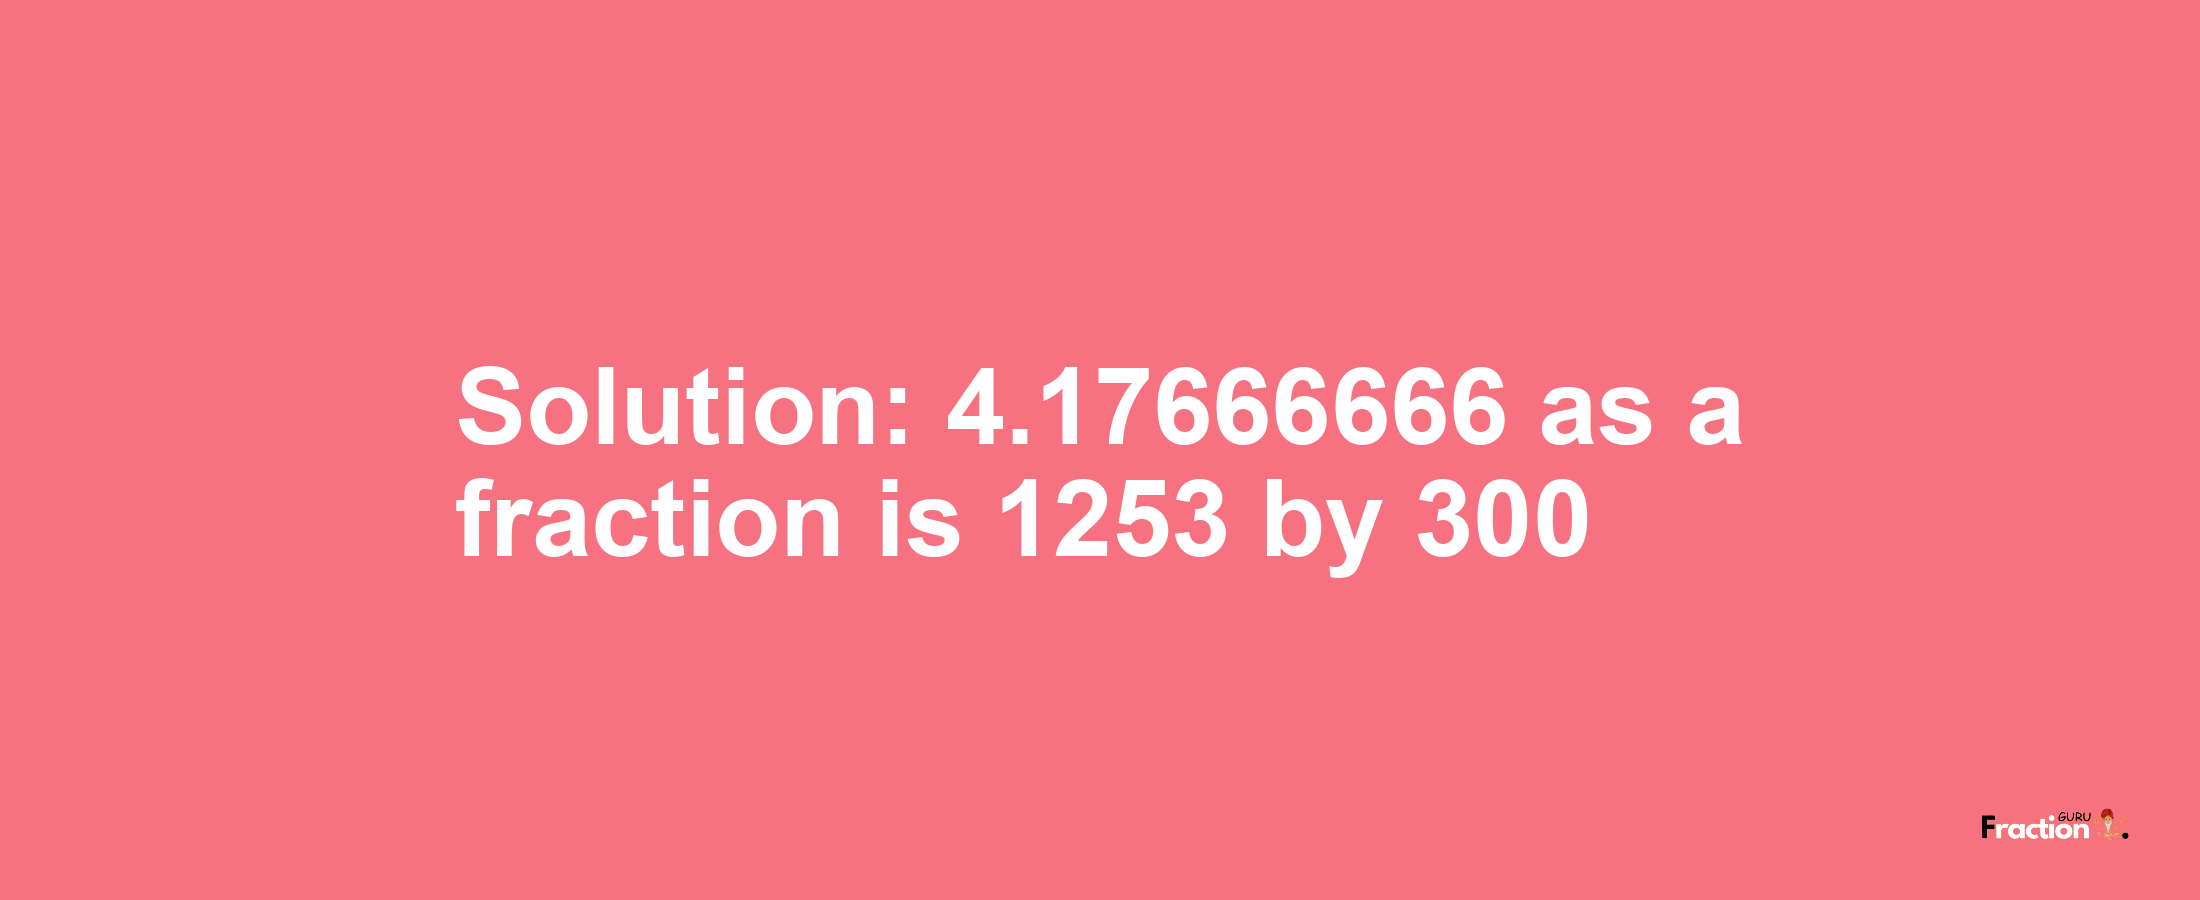 Solution:4.17666666 as a fraction is 1253/300